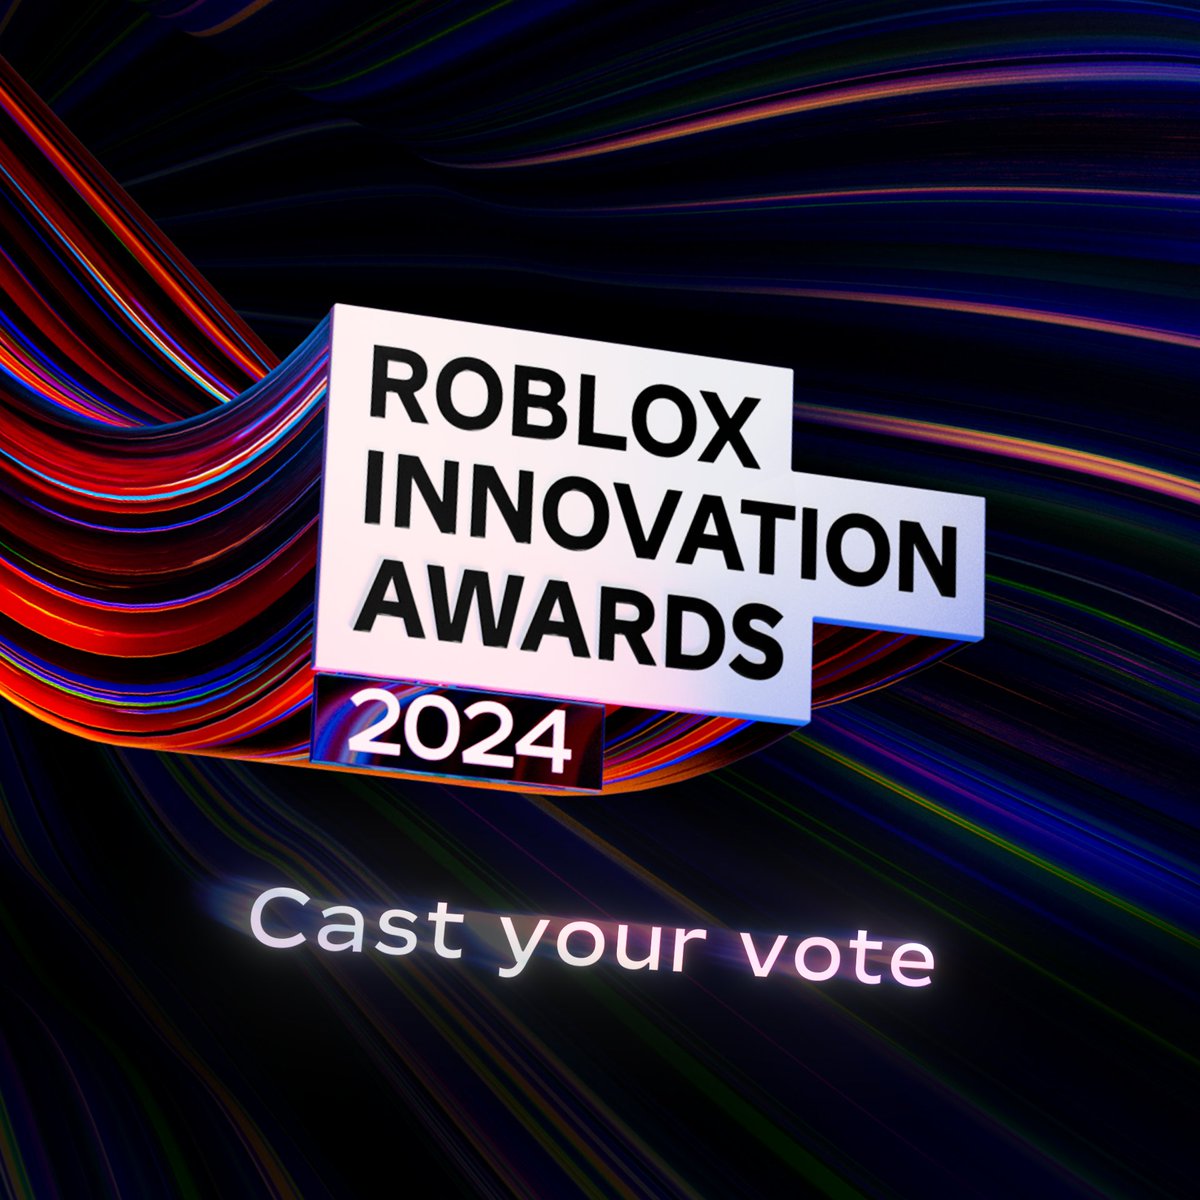 Who do you want to see at the Roblox Innovation Awards this year? Now’s your chance to have a say. Cast your vote for the top creators, video stars, and experiences. All nominations are due before 5PM PST on May 31. devforum.roblox.com/t/2979769